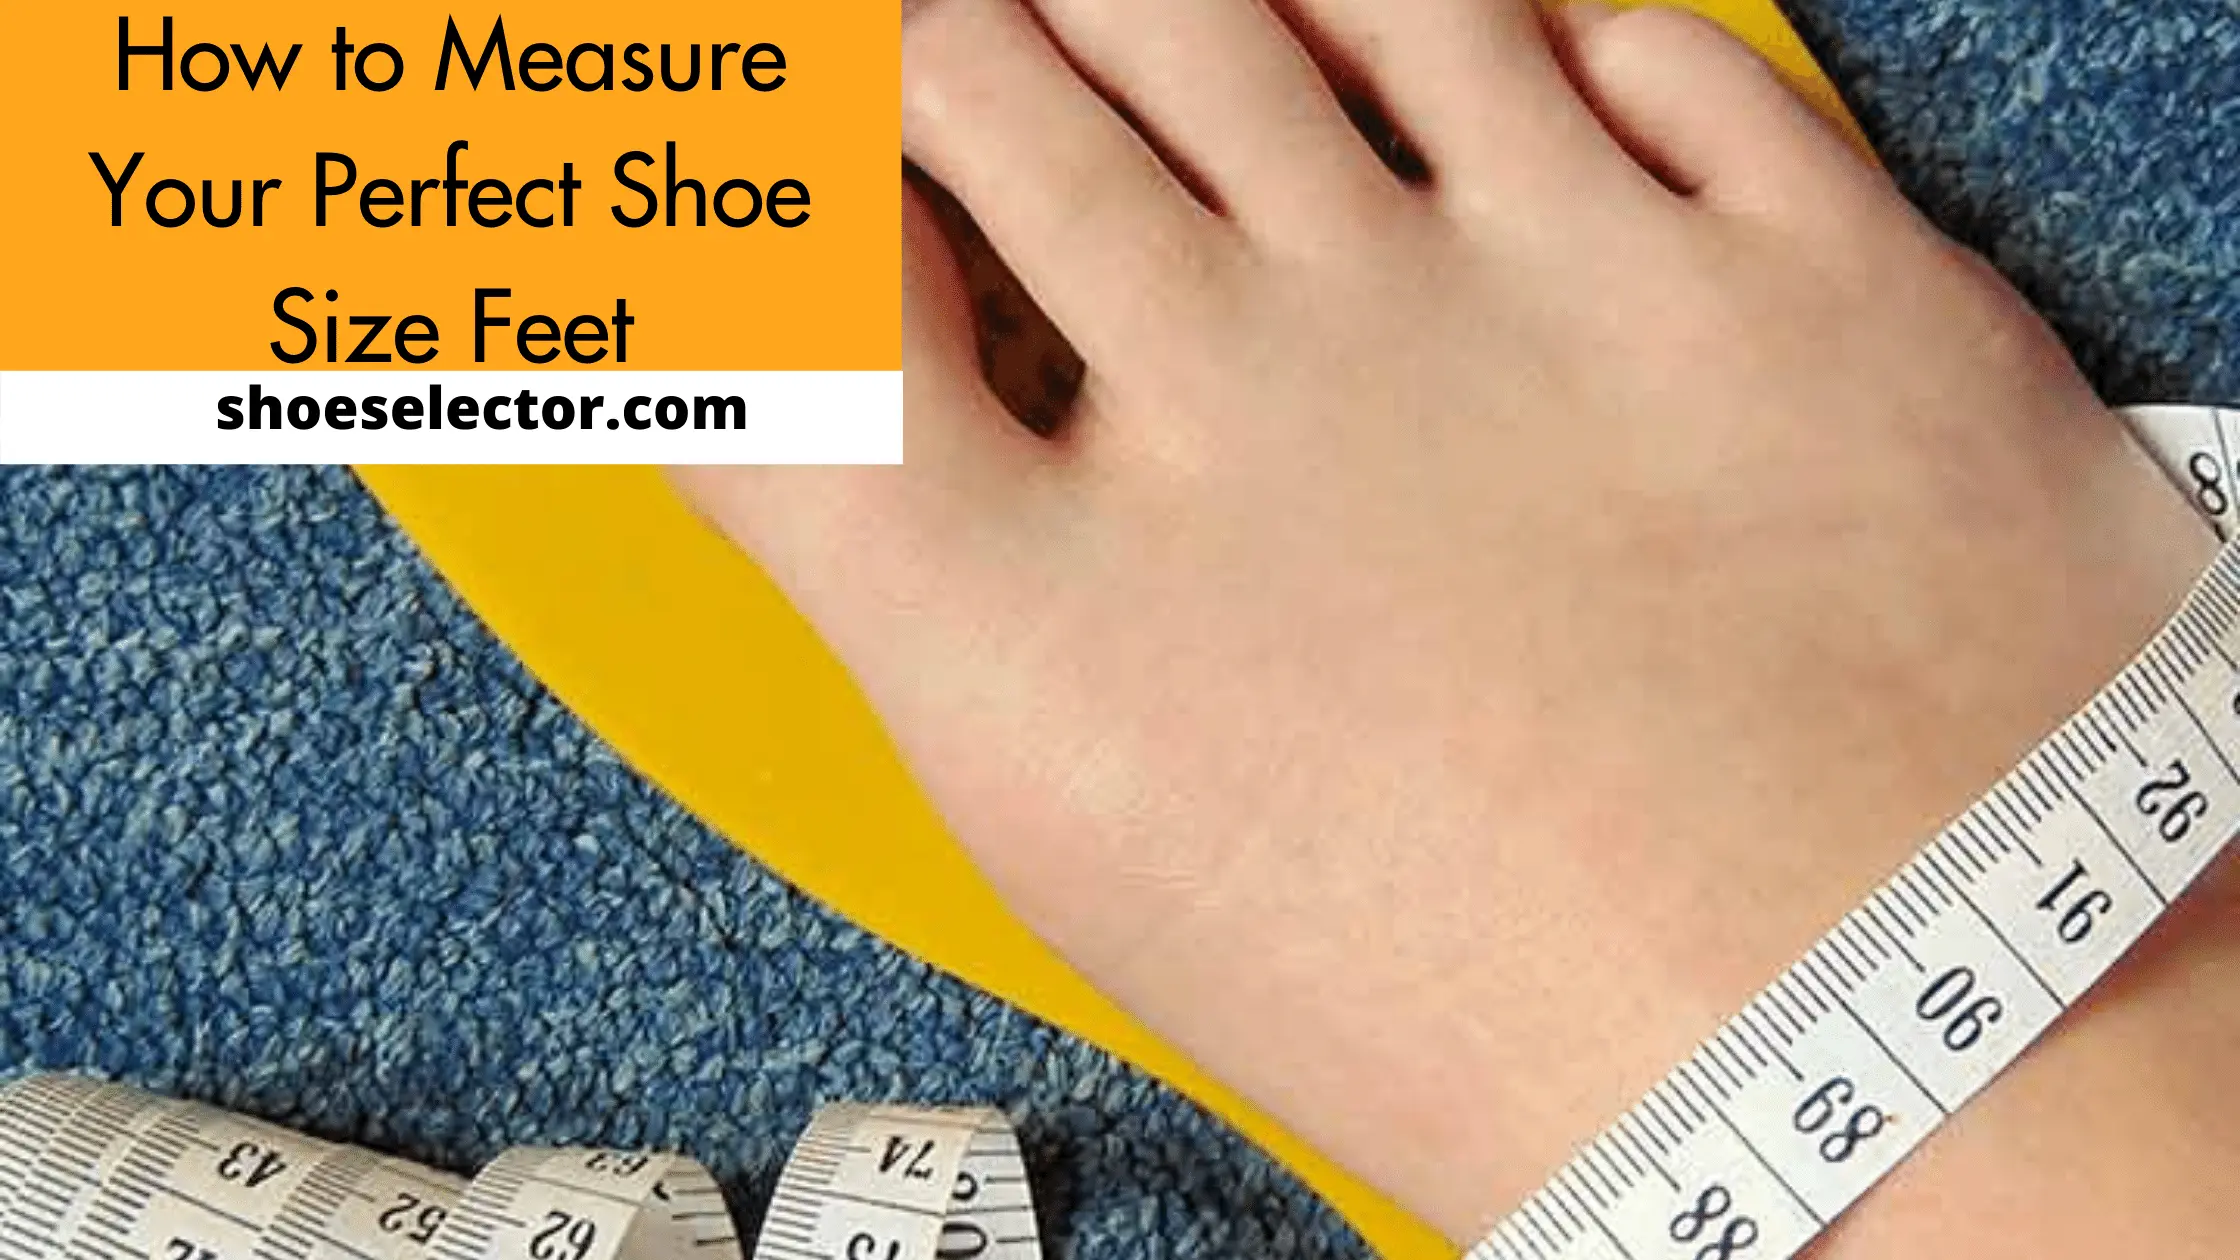 How To Measure Your Perfect Height Shoe Size Feet?